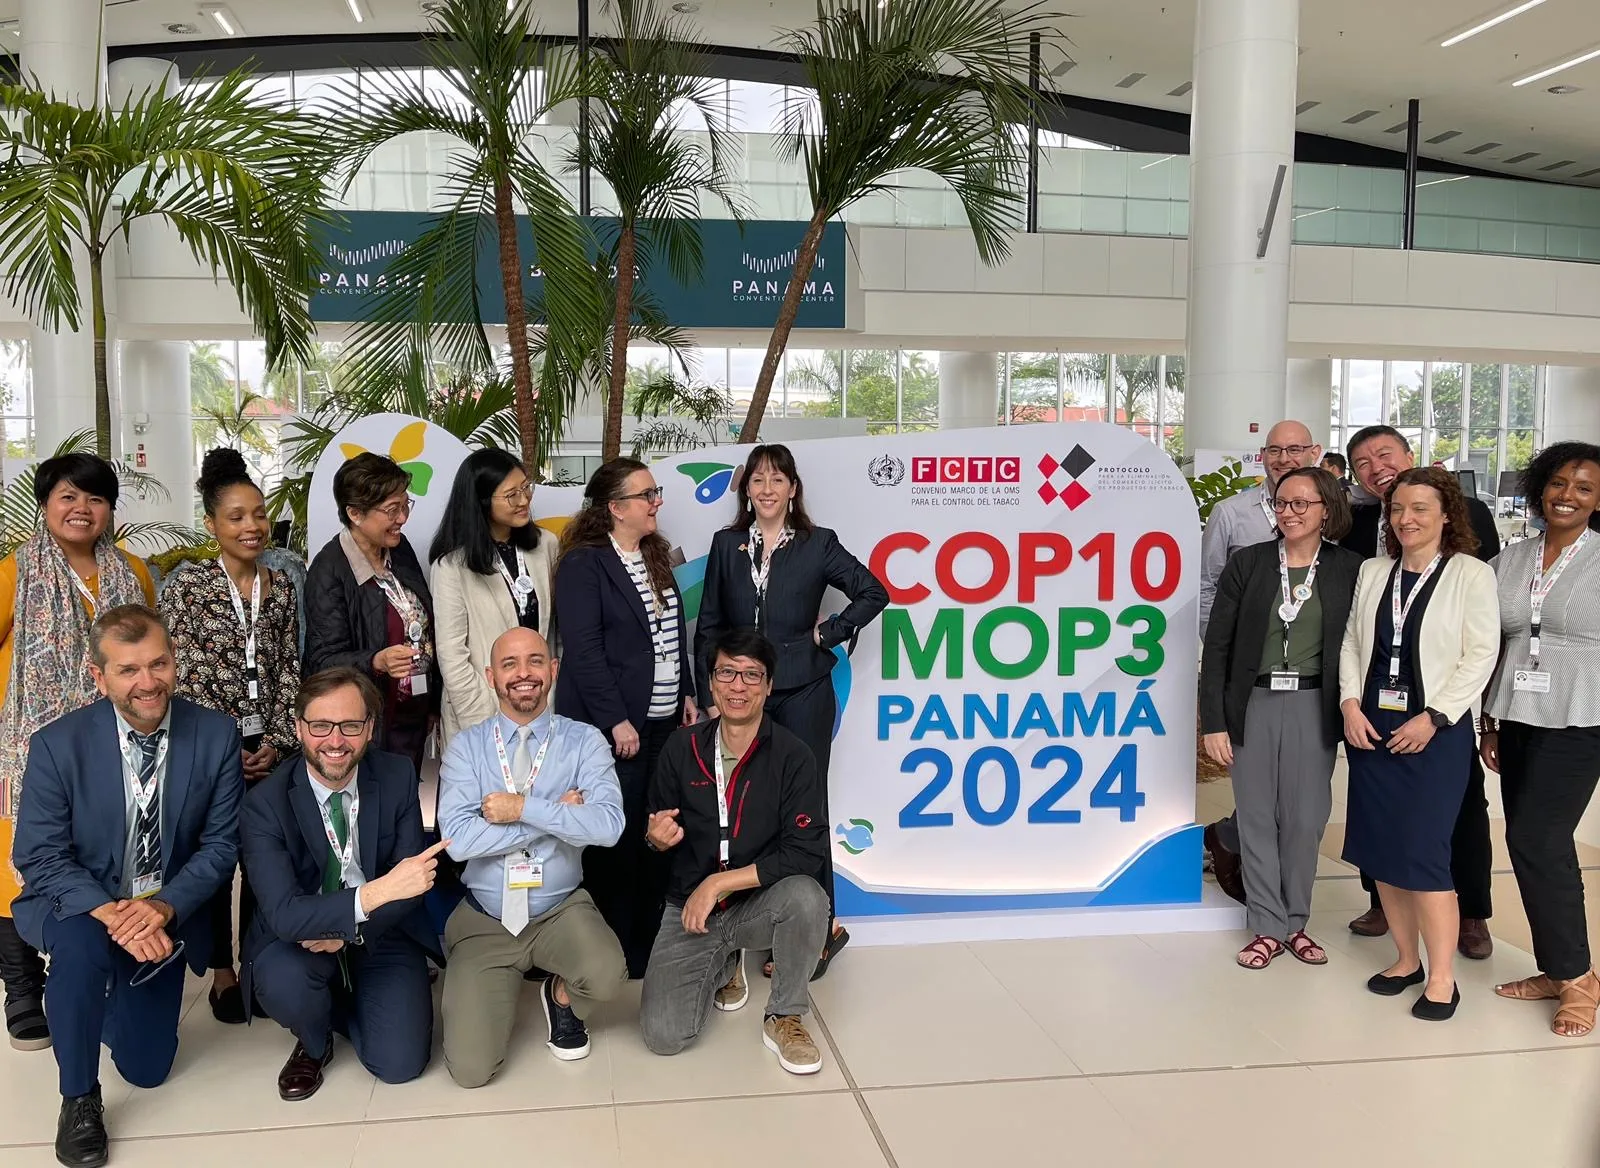 STOP and tobacco control colleagues gathered at COP10 to block tobacco ads from being shown online.